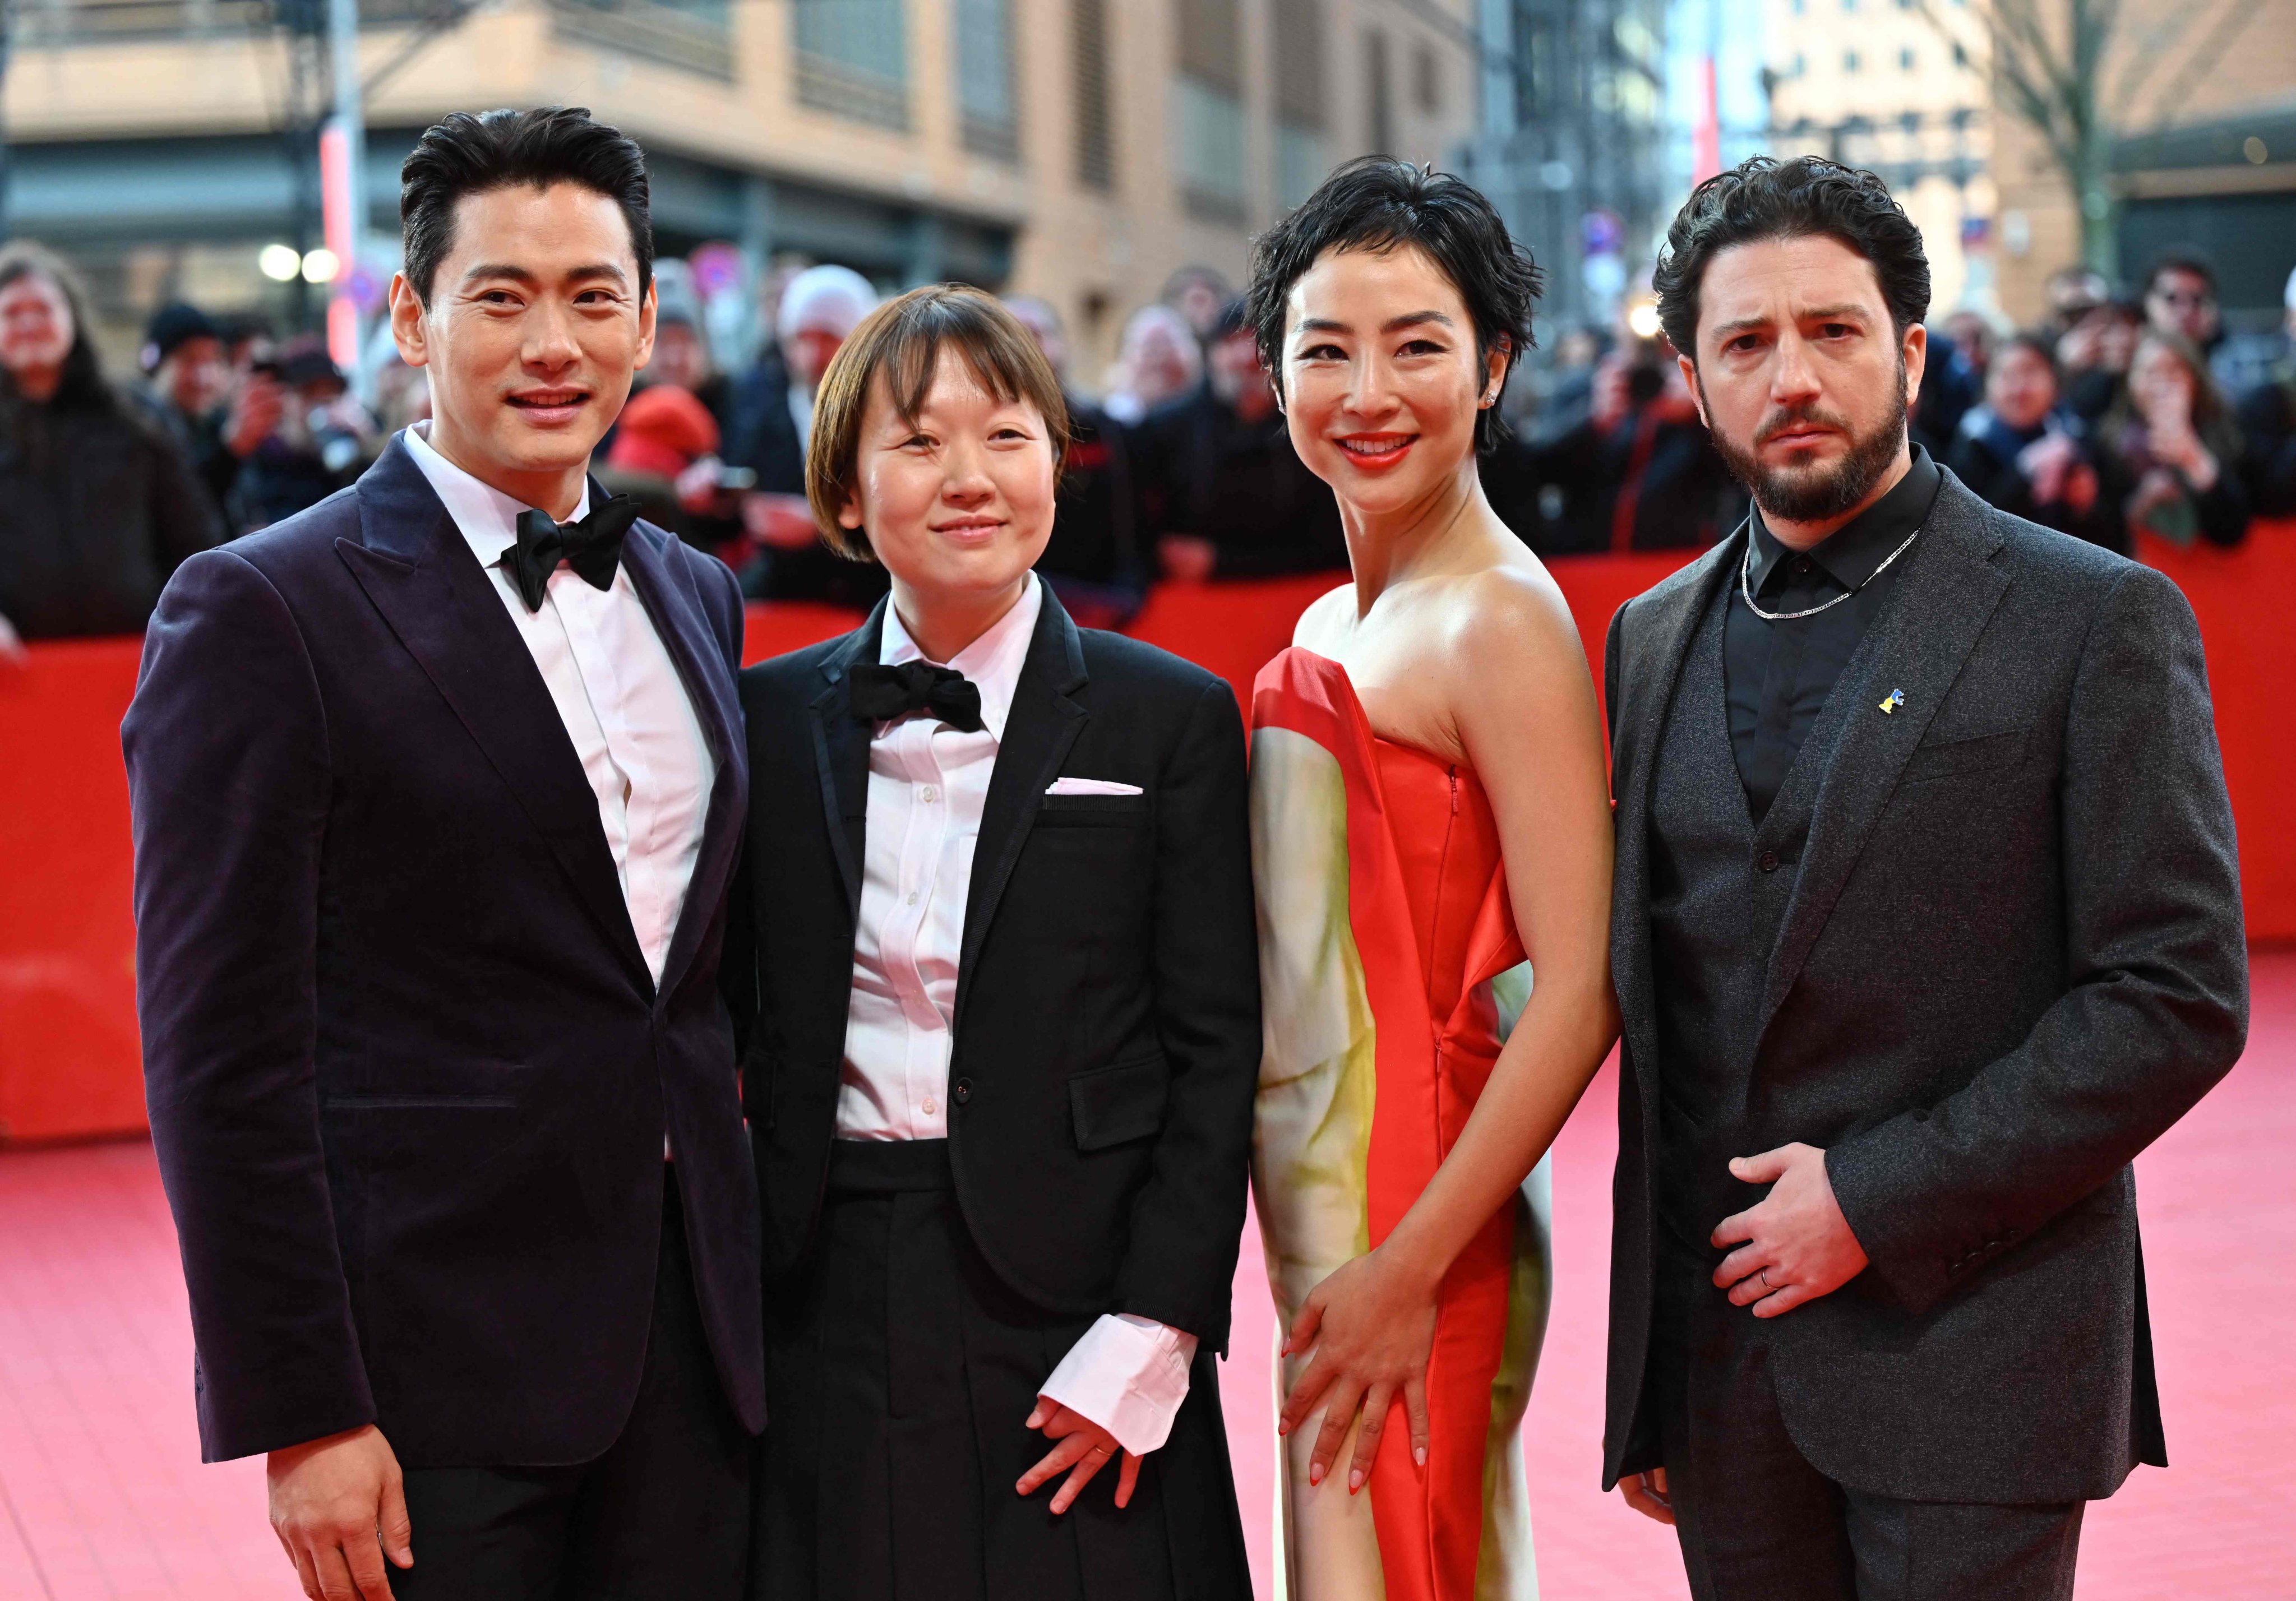 Korean-Canadian director Celine Song (second from left) with the cast of her acclaimed film “Past Lives” at this year’s Berlin Film Festival. Song is just one of many exciting emerging Asian women directors to be making a splash in the movie industry. Photo: AFP